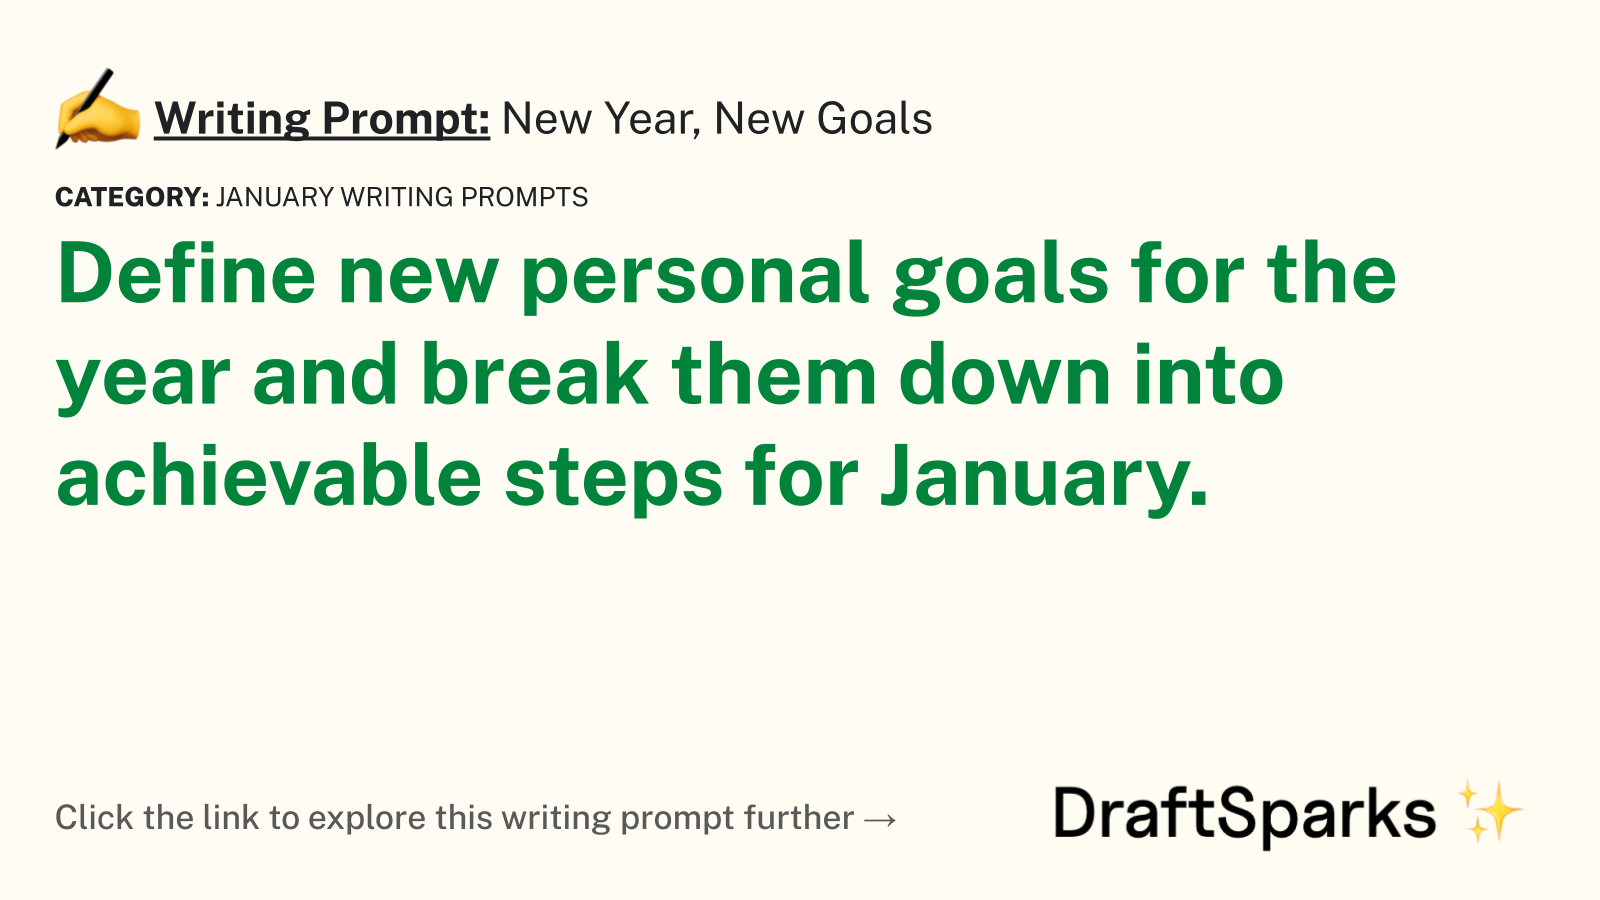 New Year, New Goals